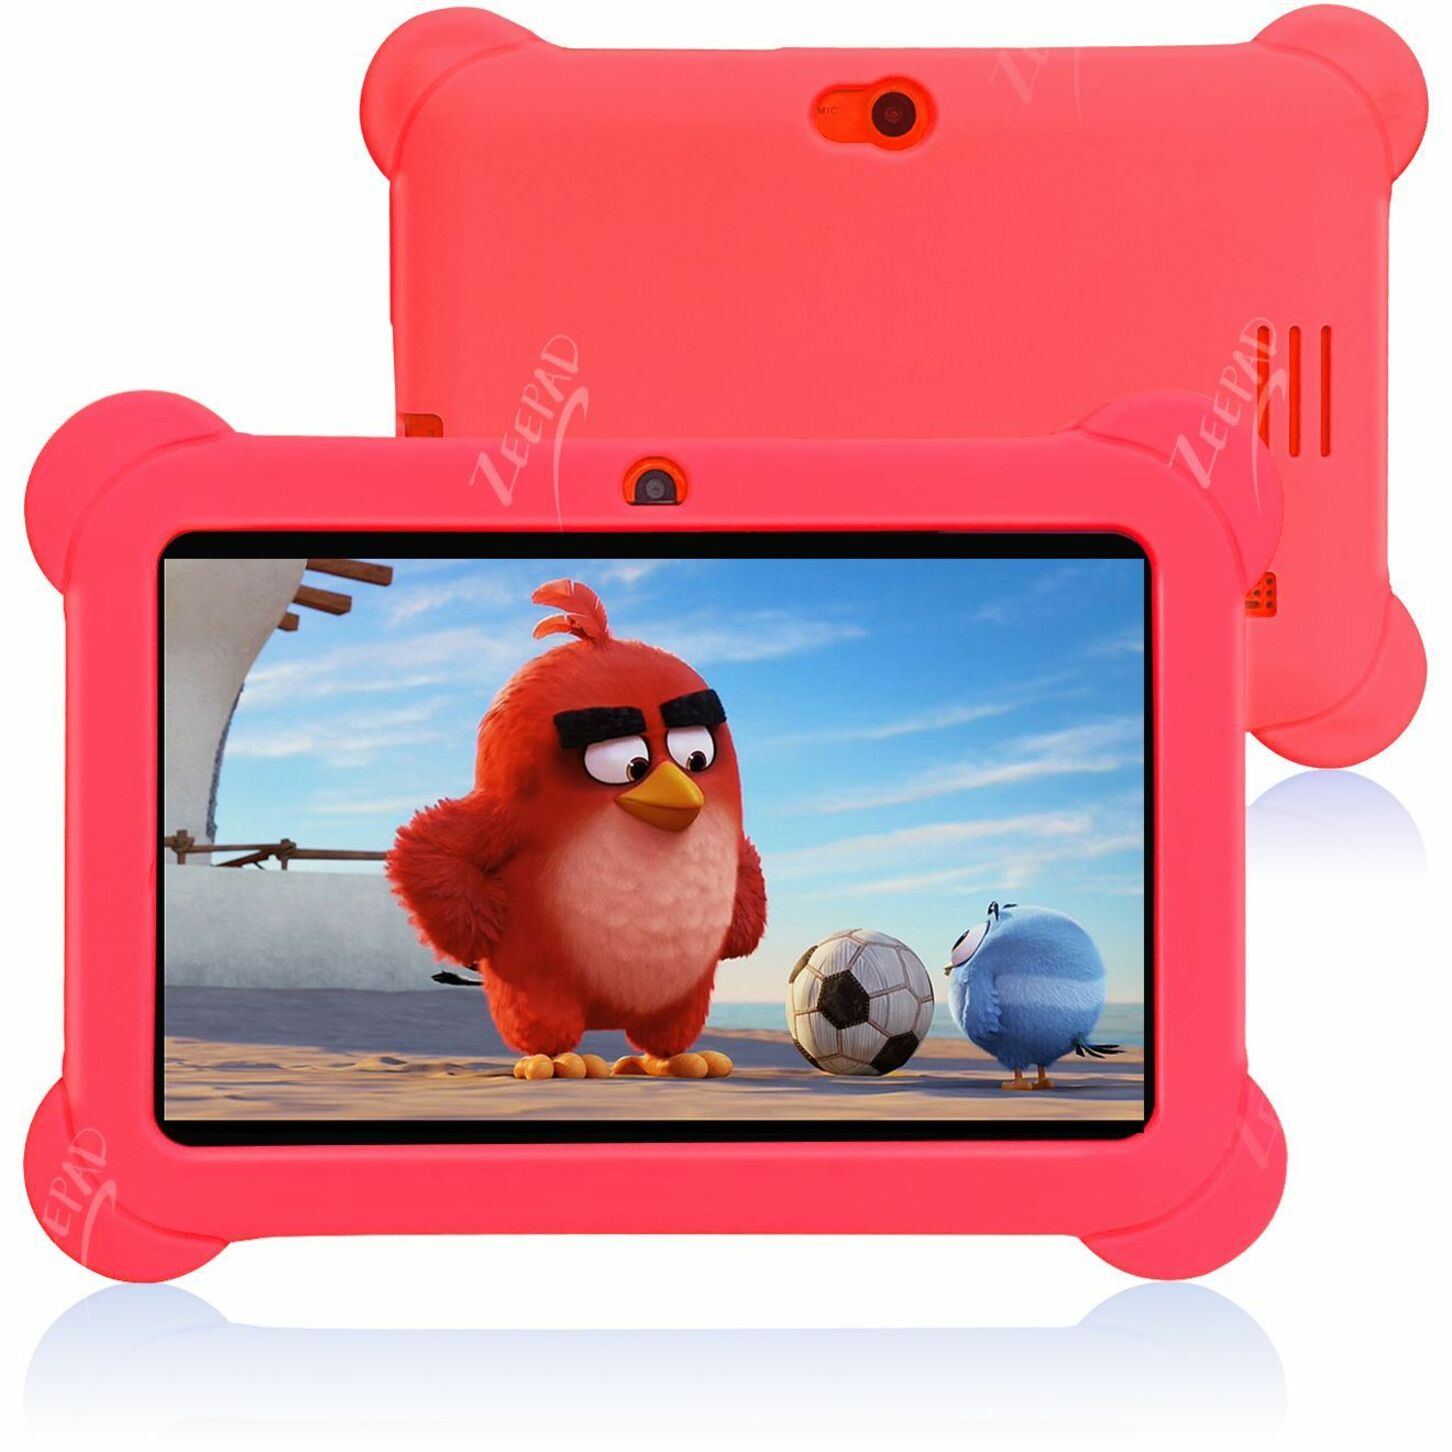 Zeepad ZEE16GRED-R 7inch KIDS Tablet Quad Core Android 4.4 KitKat-16GB, Wi-Fi, Bluetooth, Red